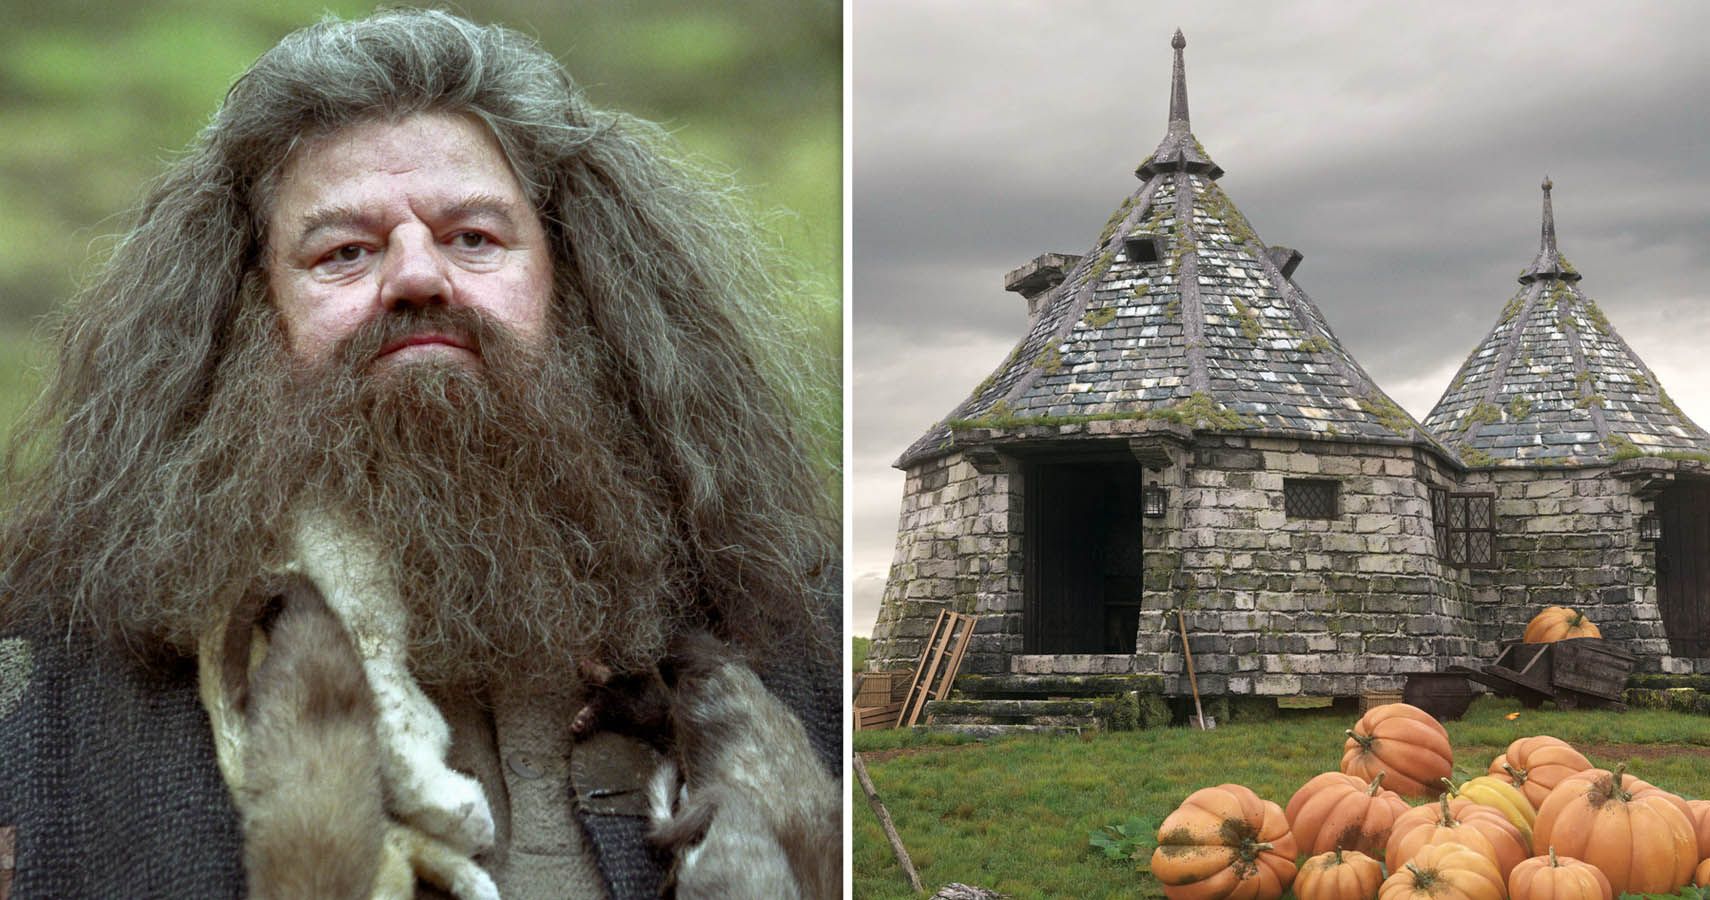 Harry Potter 10 Hagrids Hut Moments The Movies Missed Out On